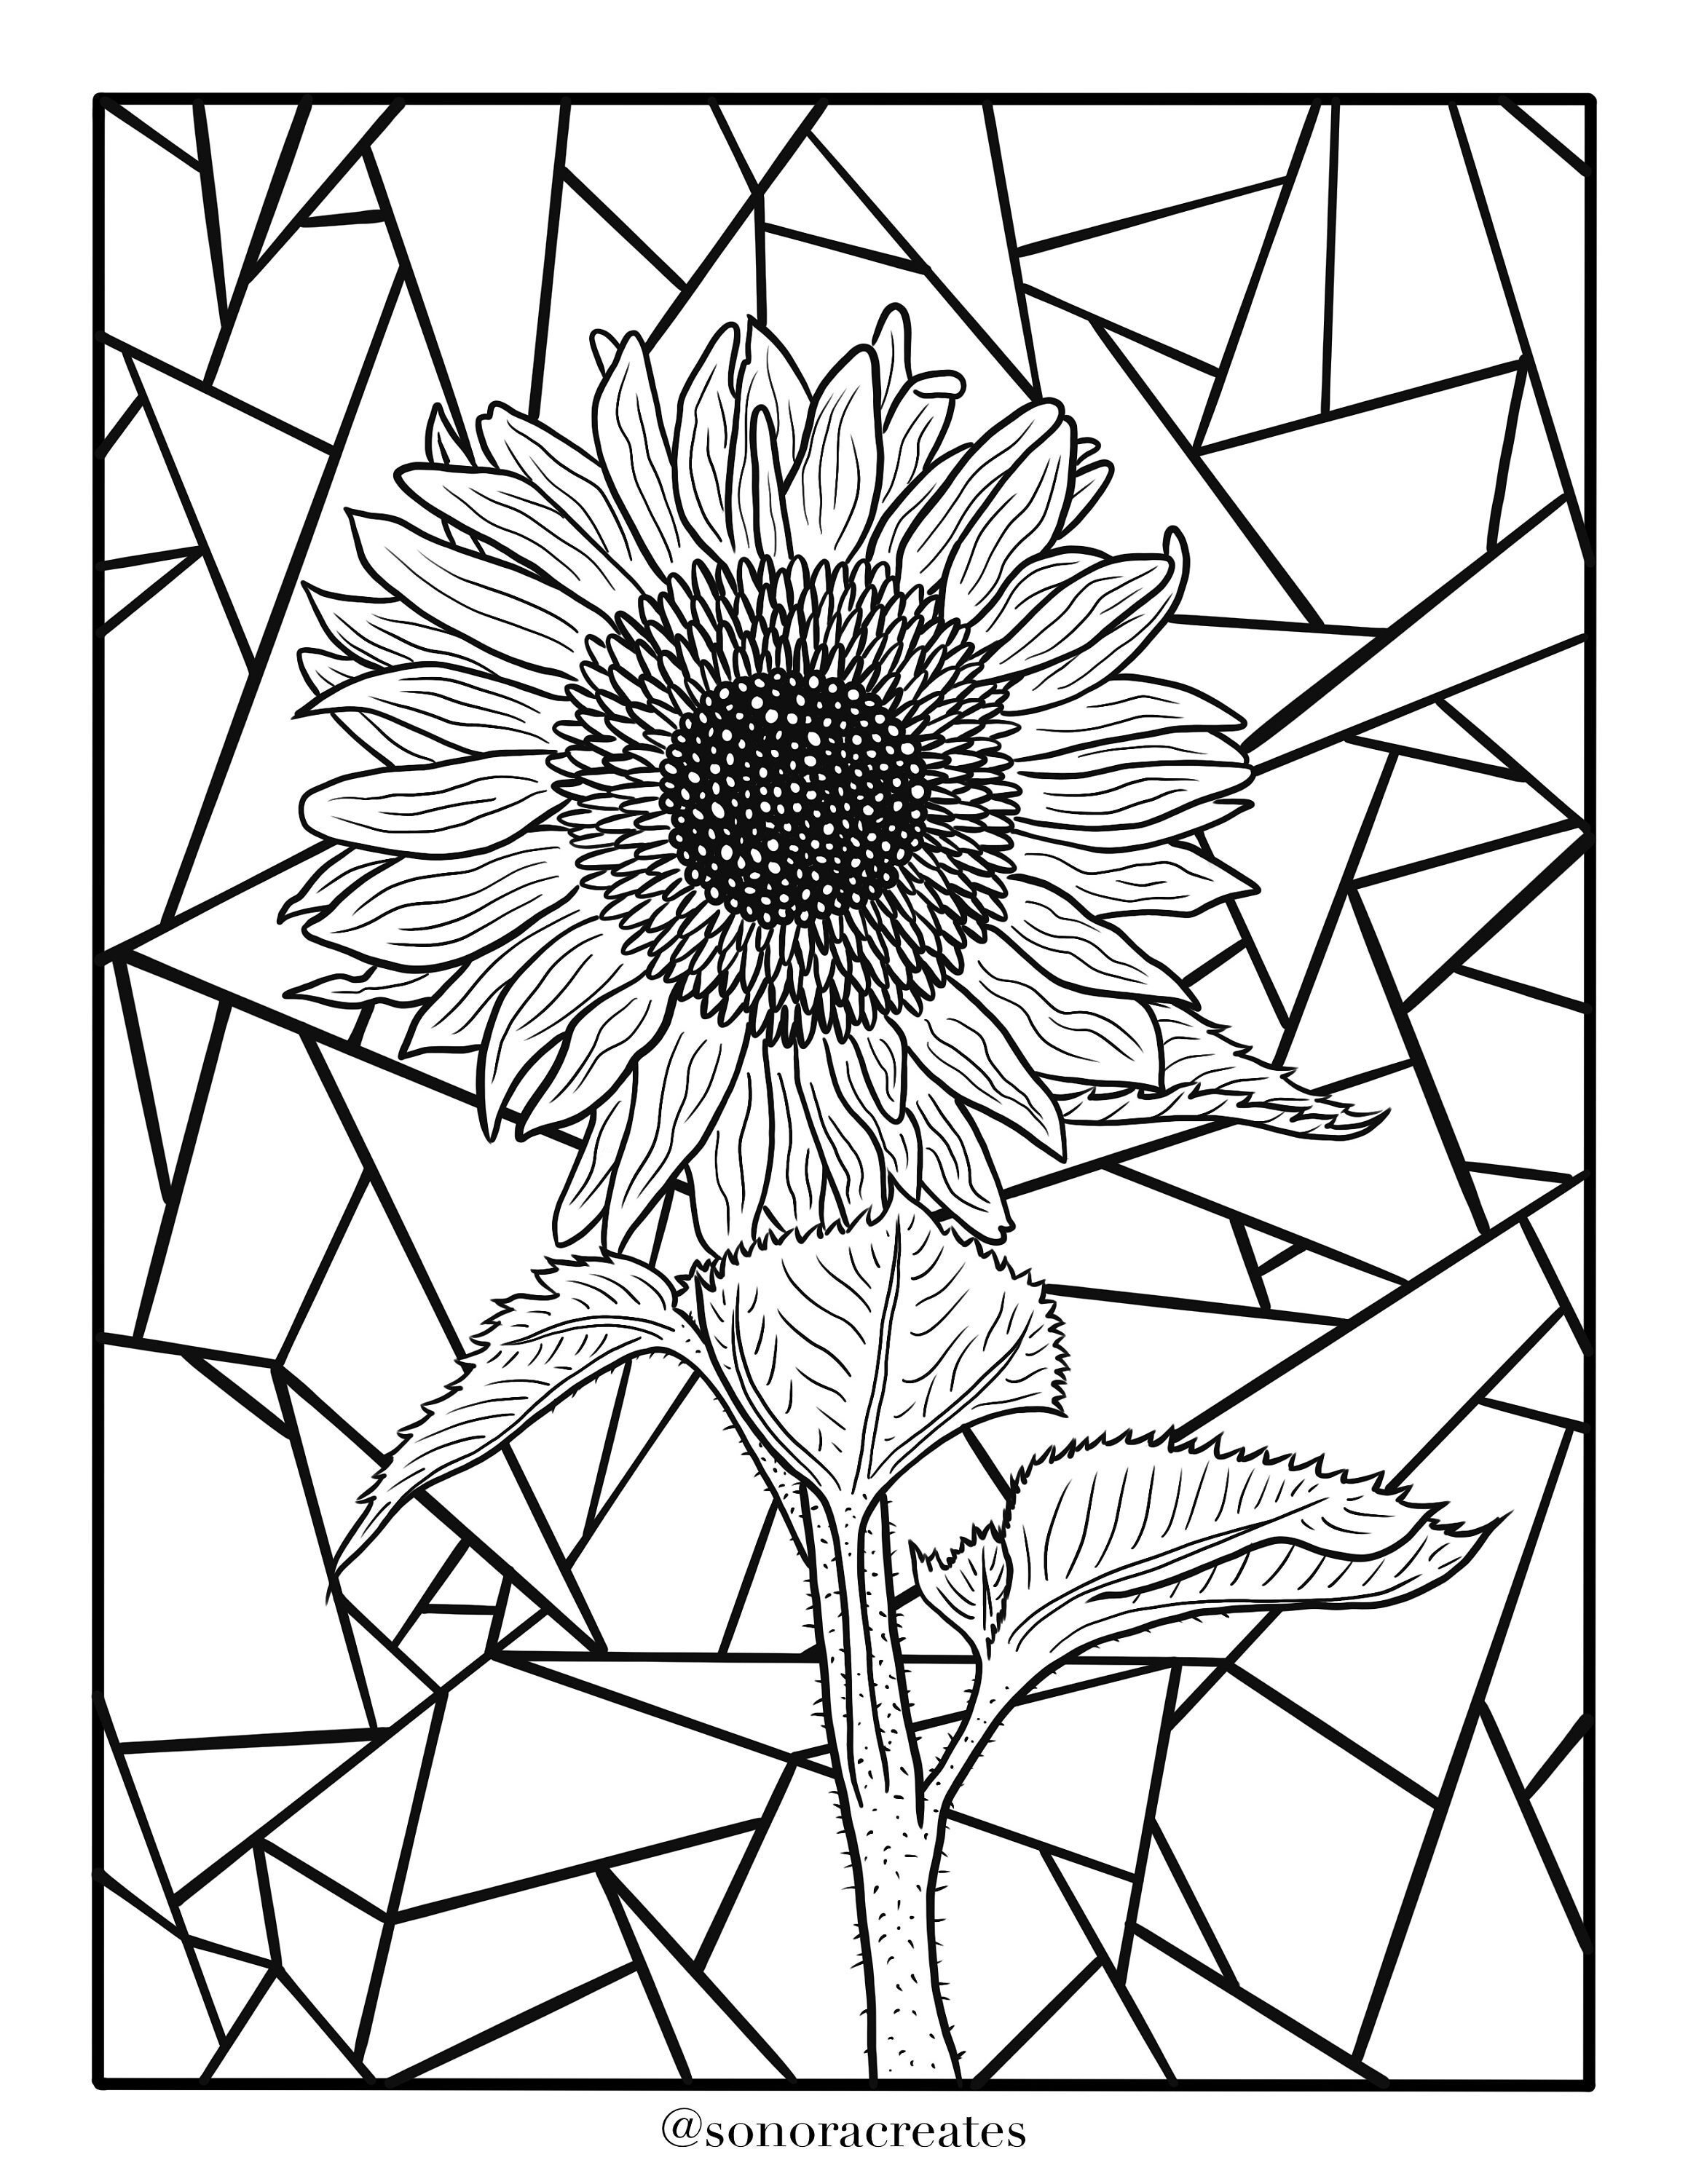 Sunflower colouring page